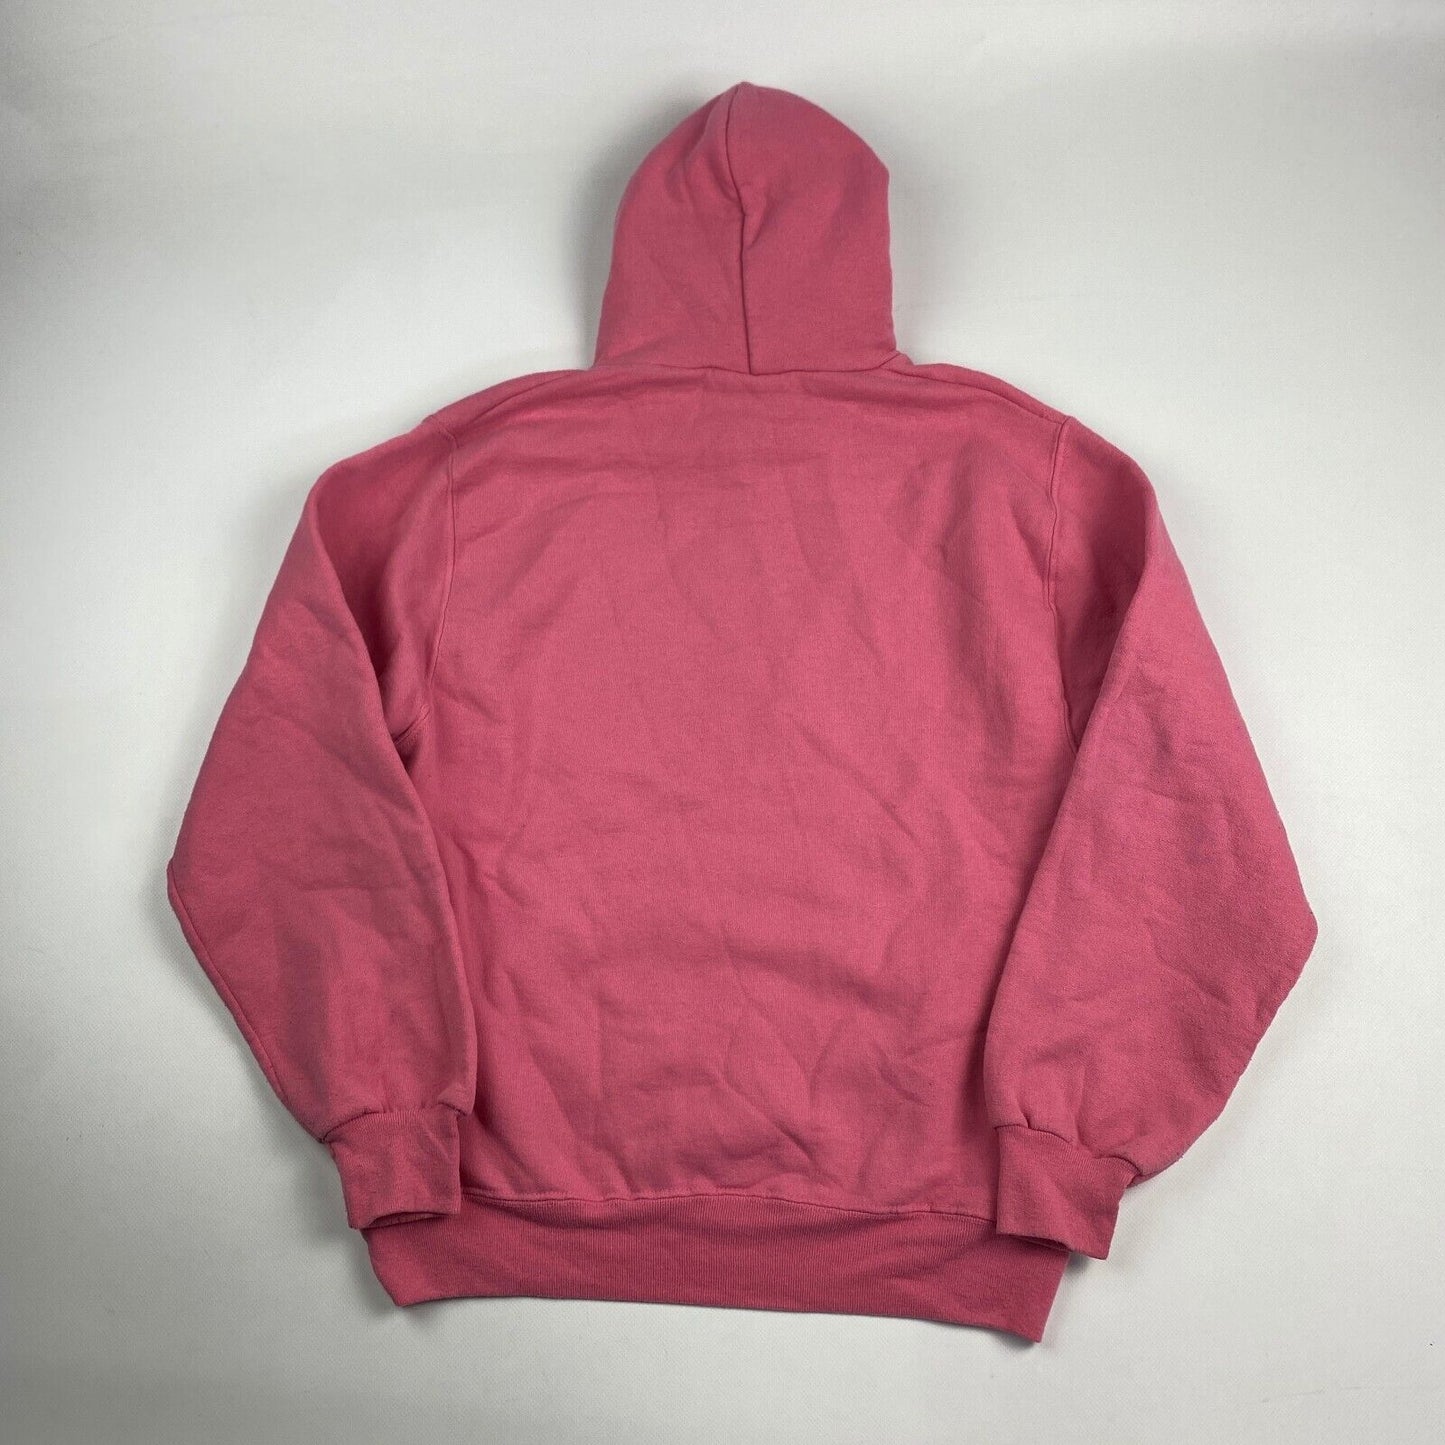 VINTAGE Cape Cod Mass Pink Hoodie Sweater sz Small Mens